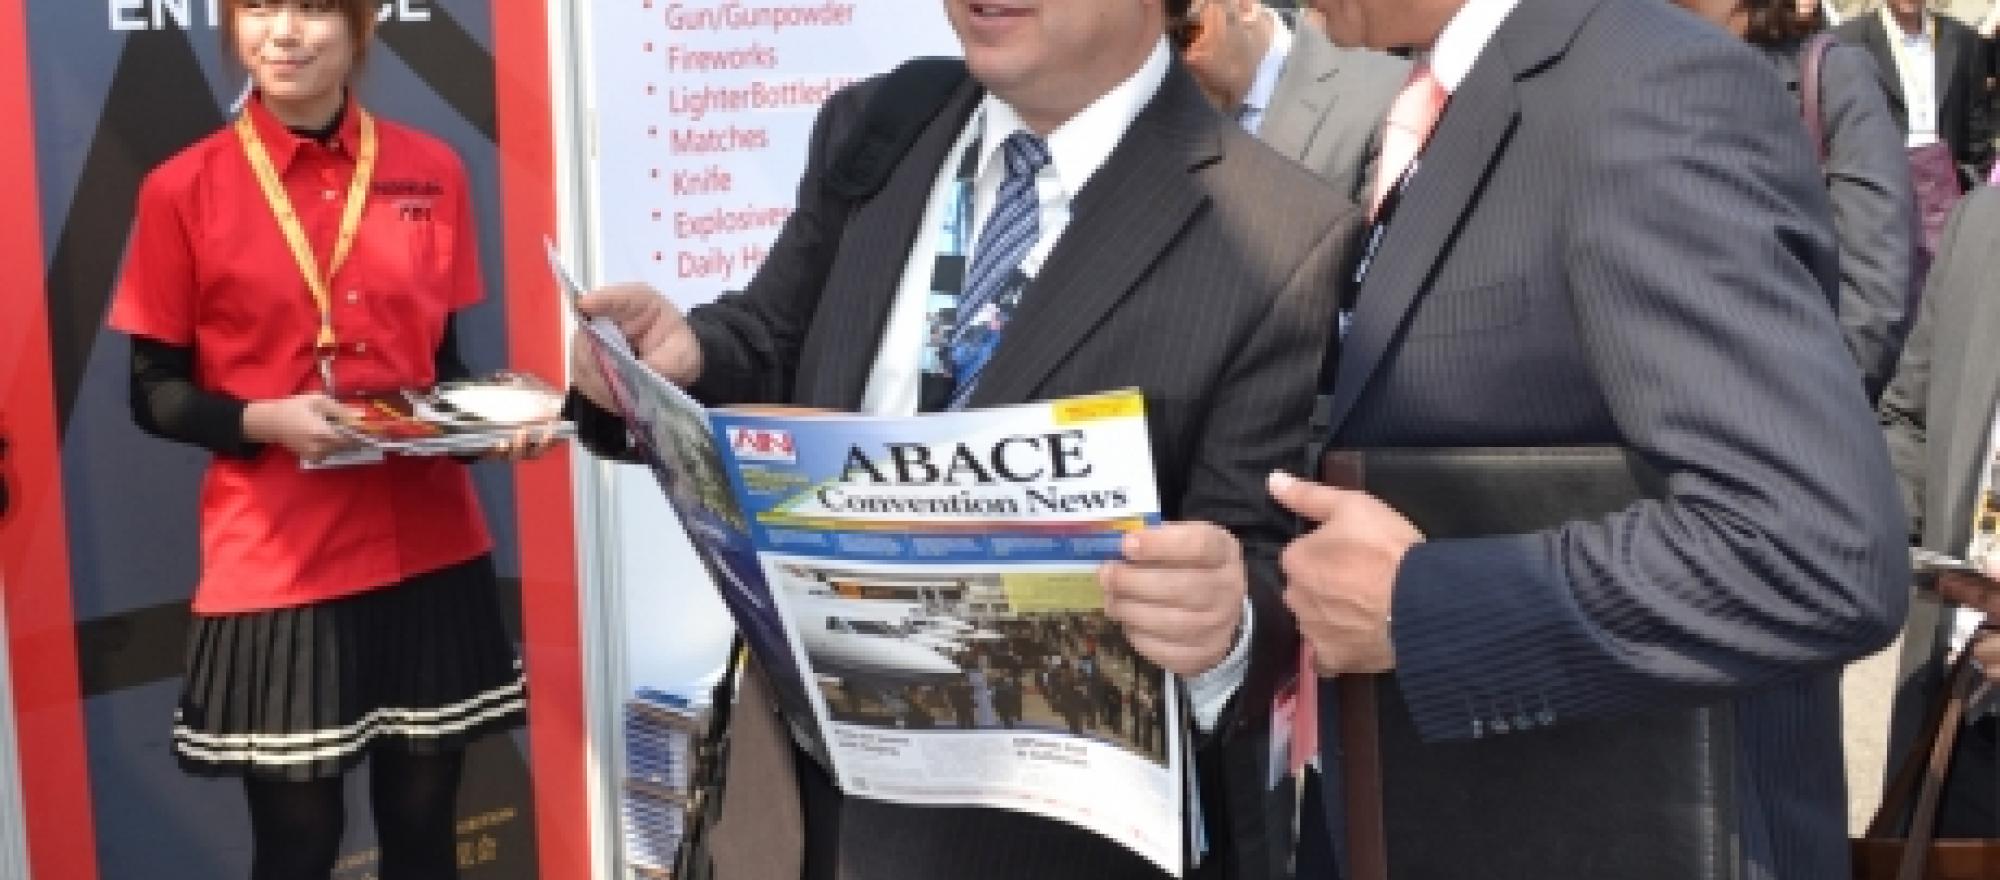 The 2012 Abace event in Shanghai revealed the promise of the Chinese market.